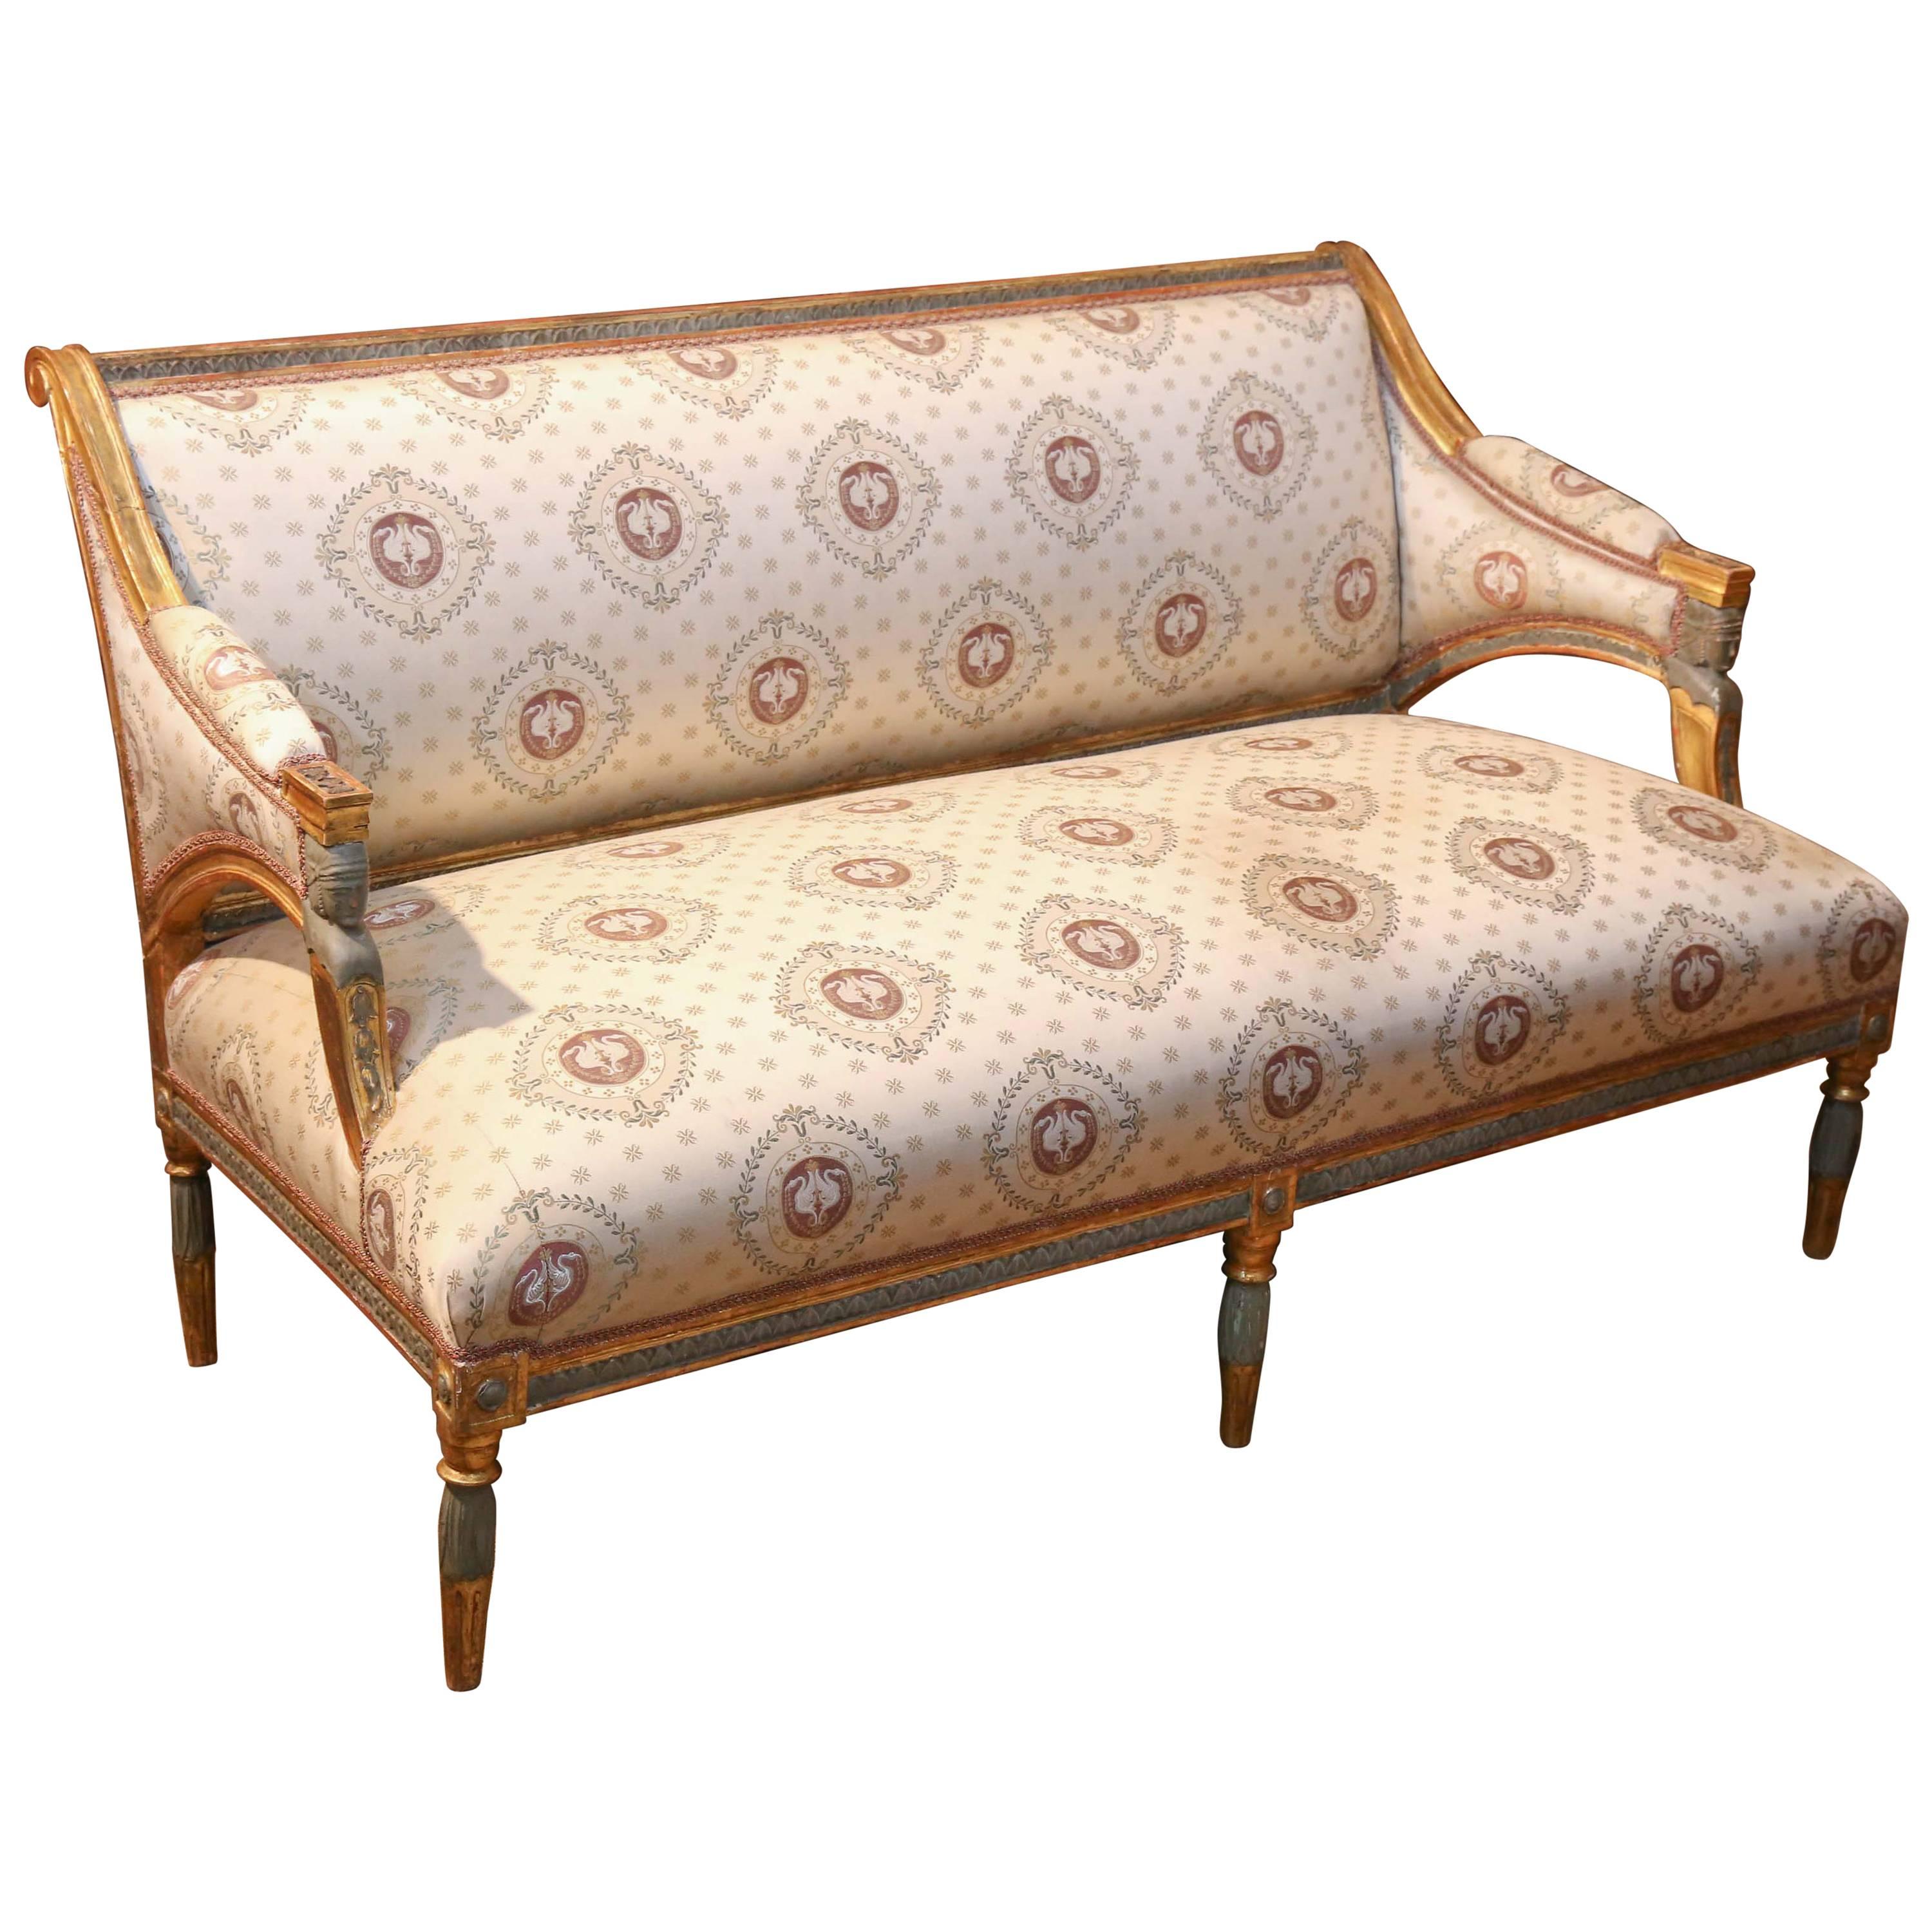 French Empire Settee Giltwood and Parcel Paint